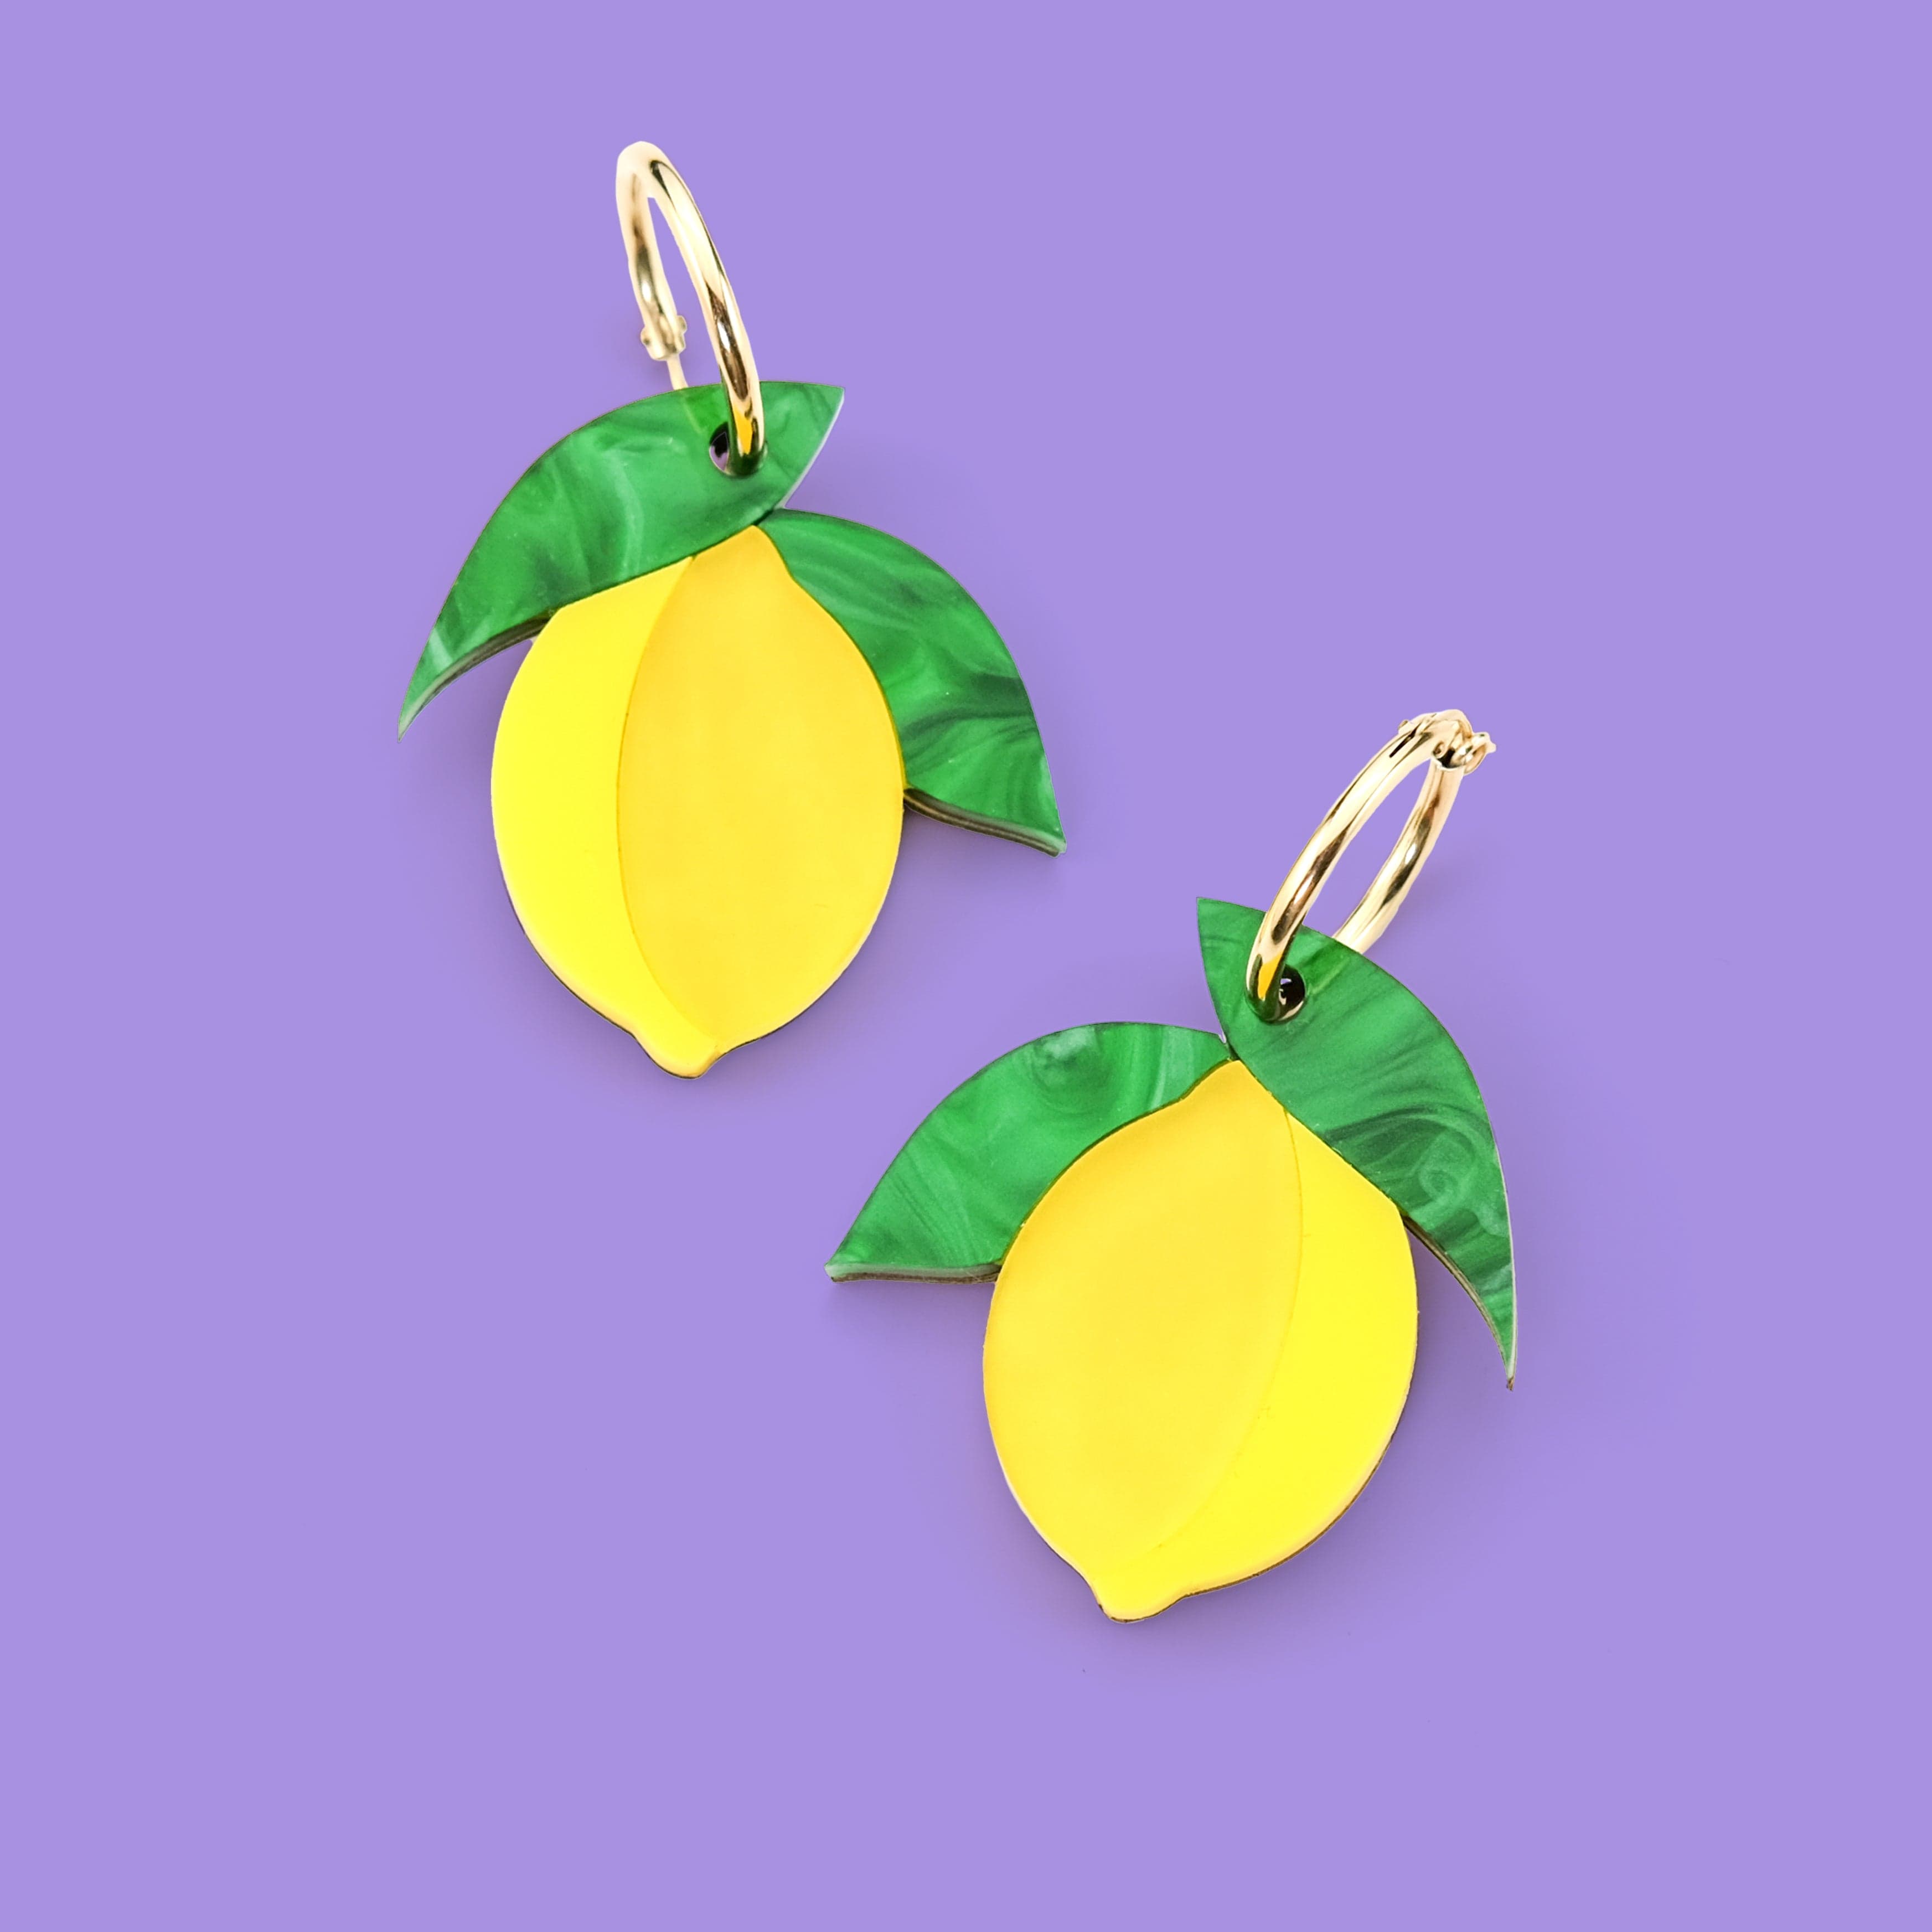 Fun and vibrant Sicilian lemon dangly earrings with gold-filled hoops